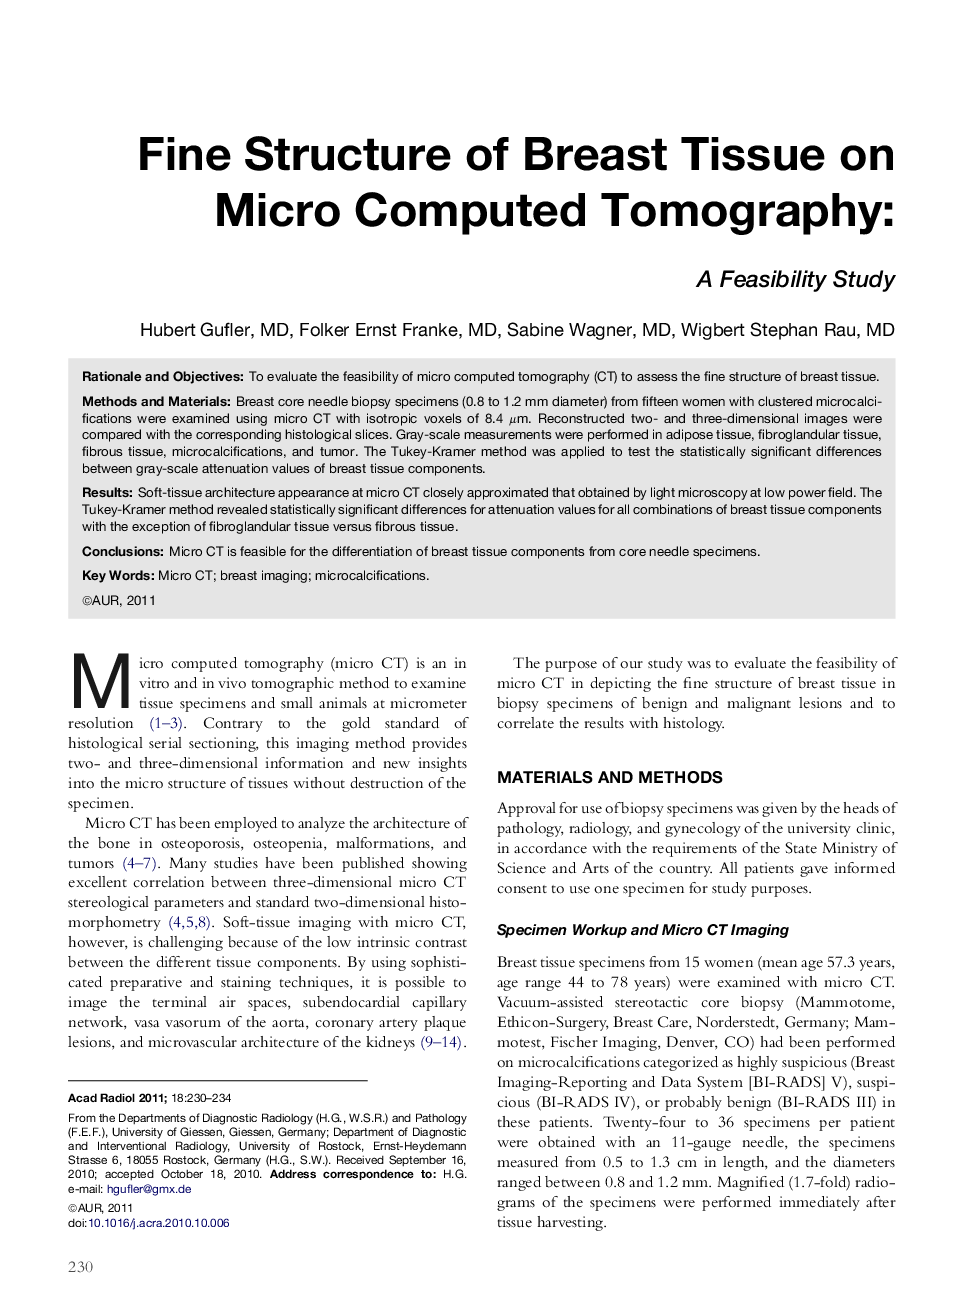 Fine Structure of Breast Tissue on Micro Computed Tomography